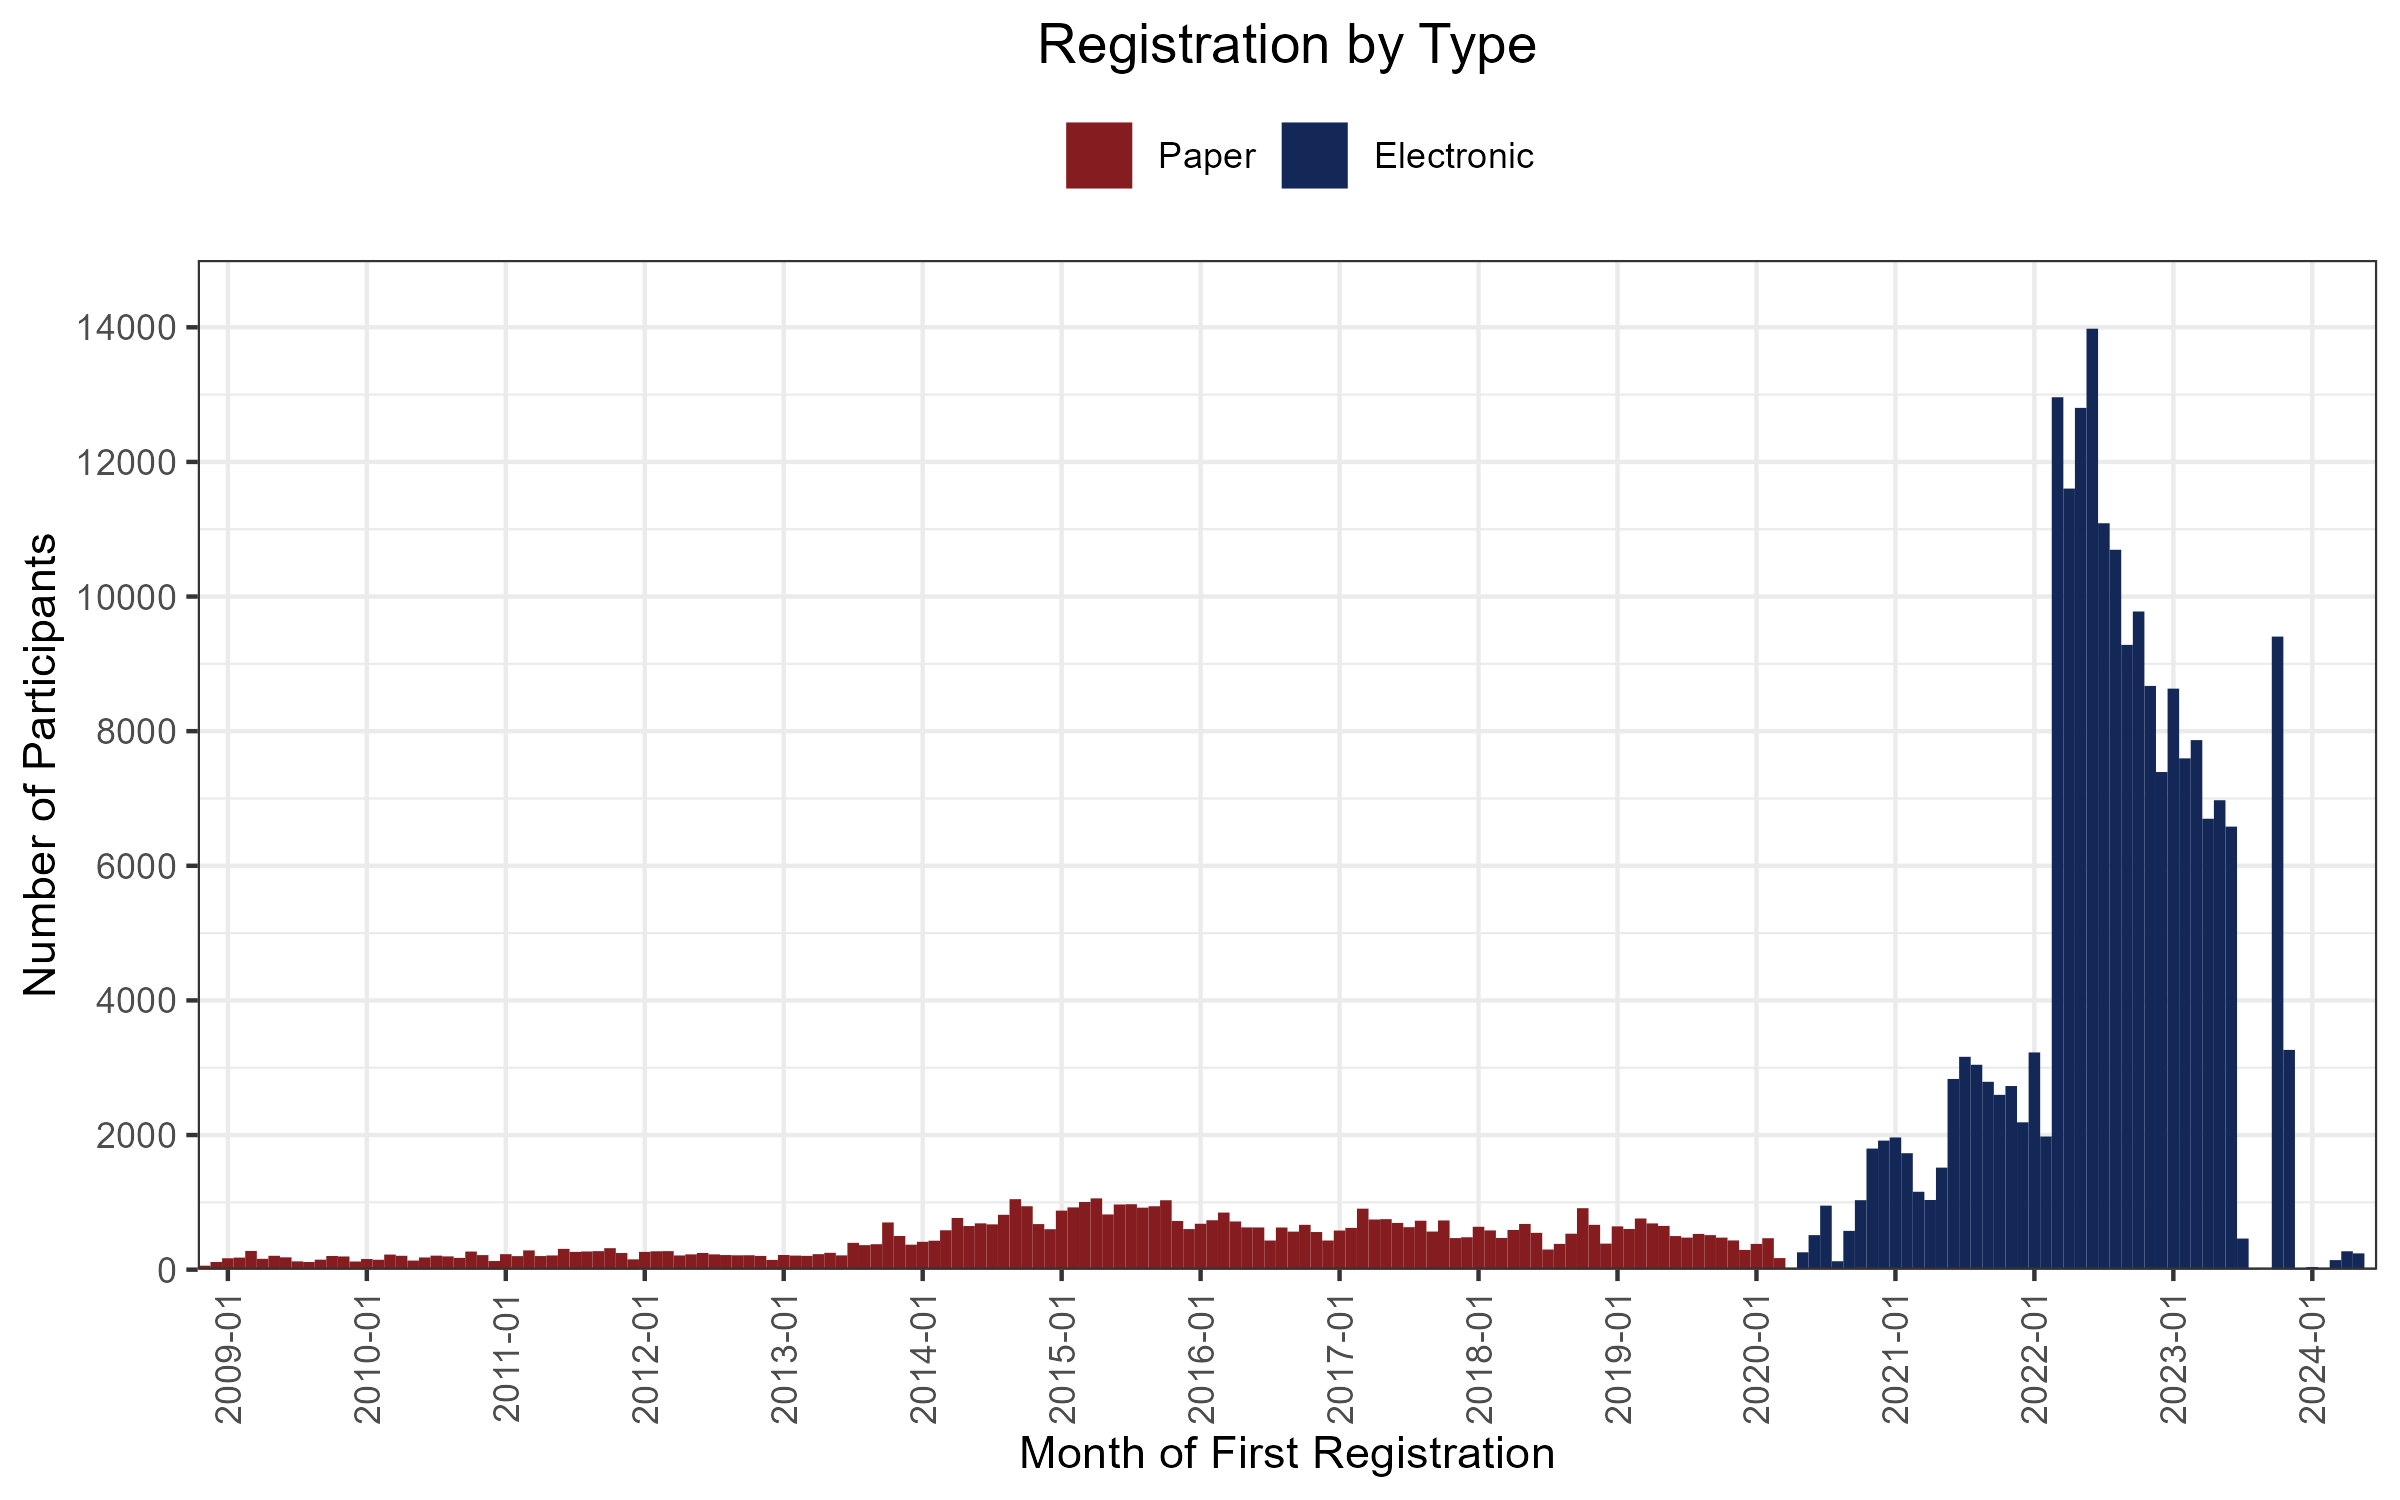 Registration by Type